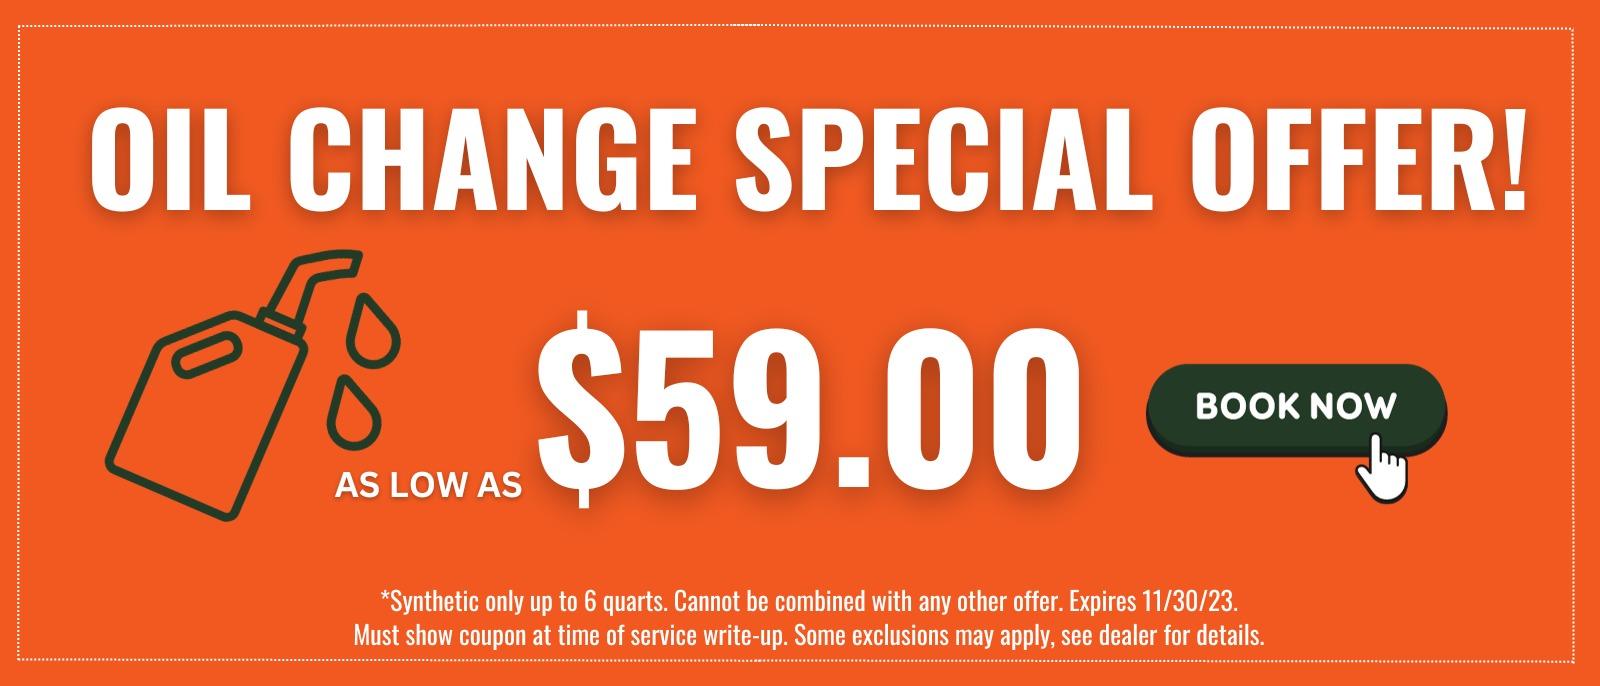 OIL CHANGE SPECIAL OFFER! $59.00 AS LOW AS BOOK NOW 11/30/22